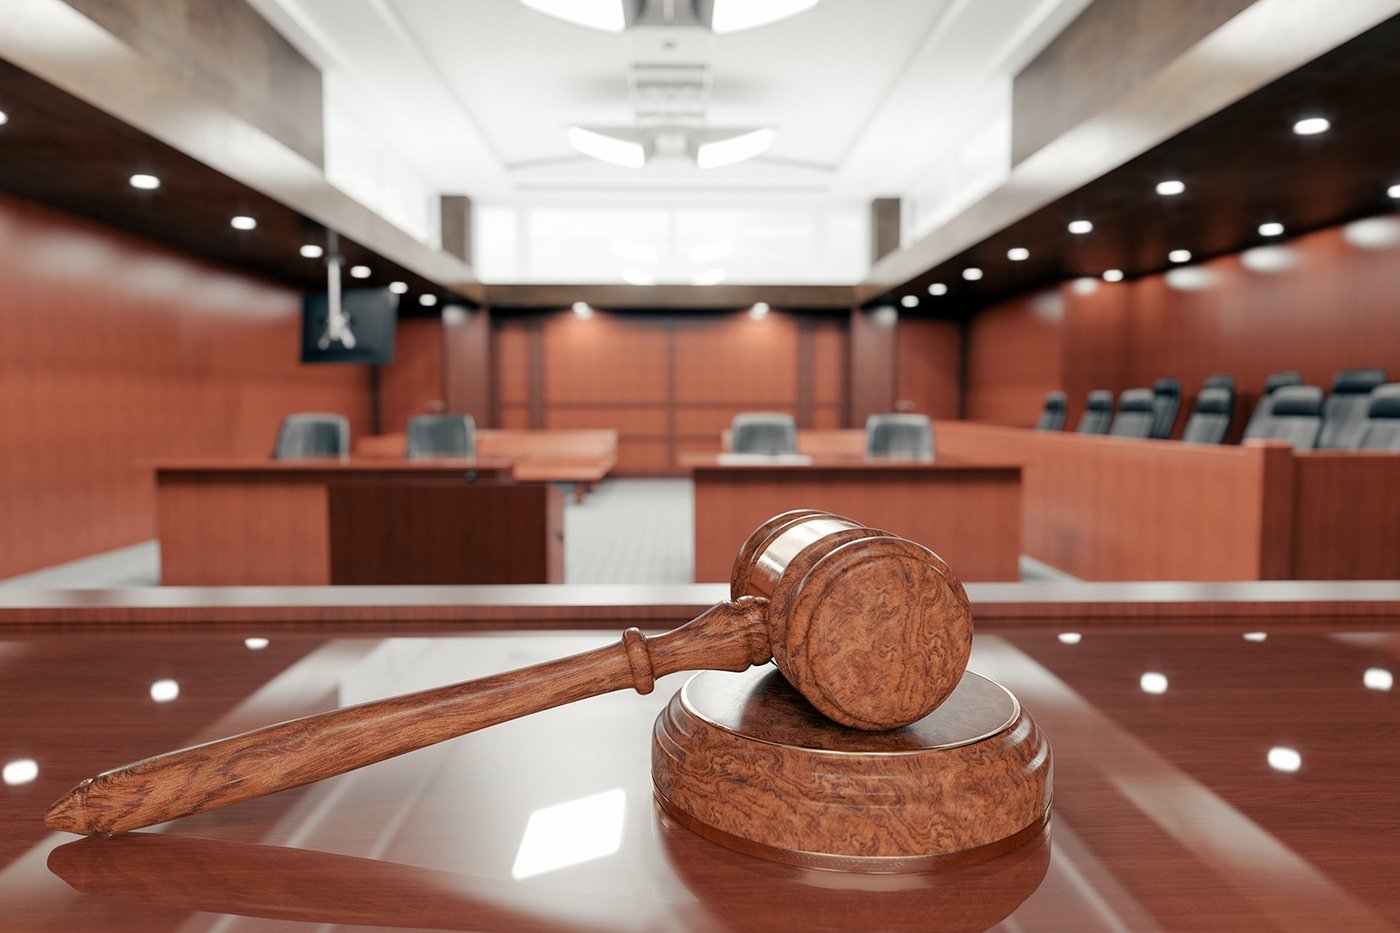 Gavel in Empty Courtroom (Stock Image)